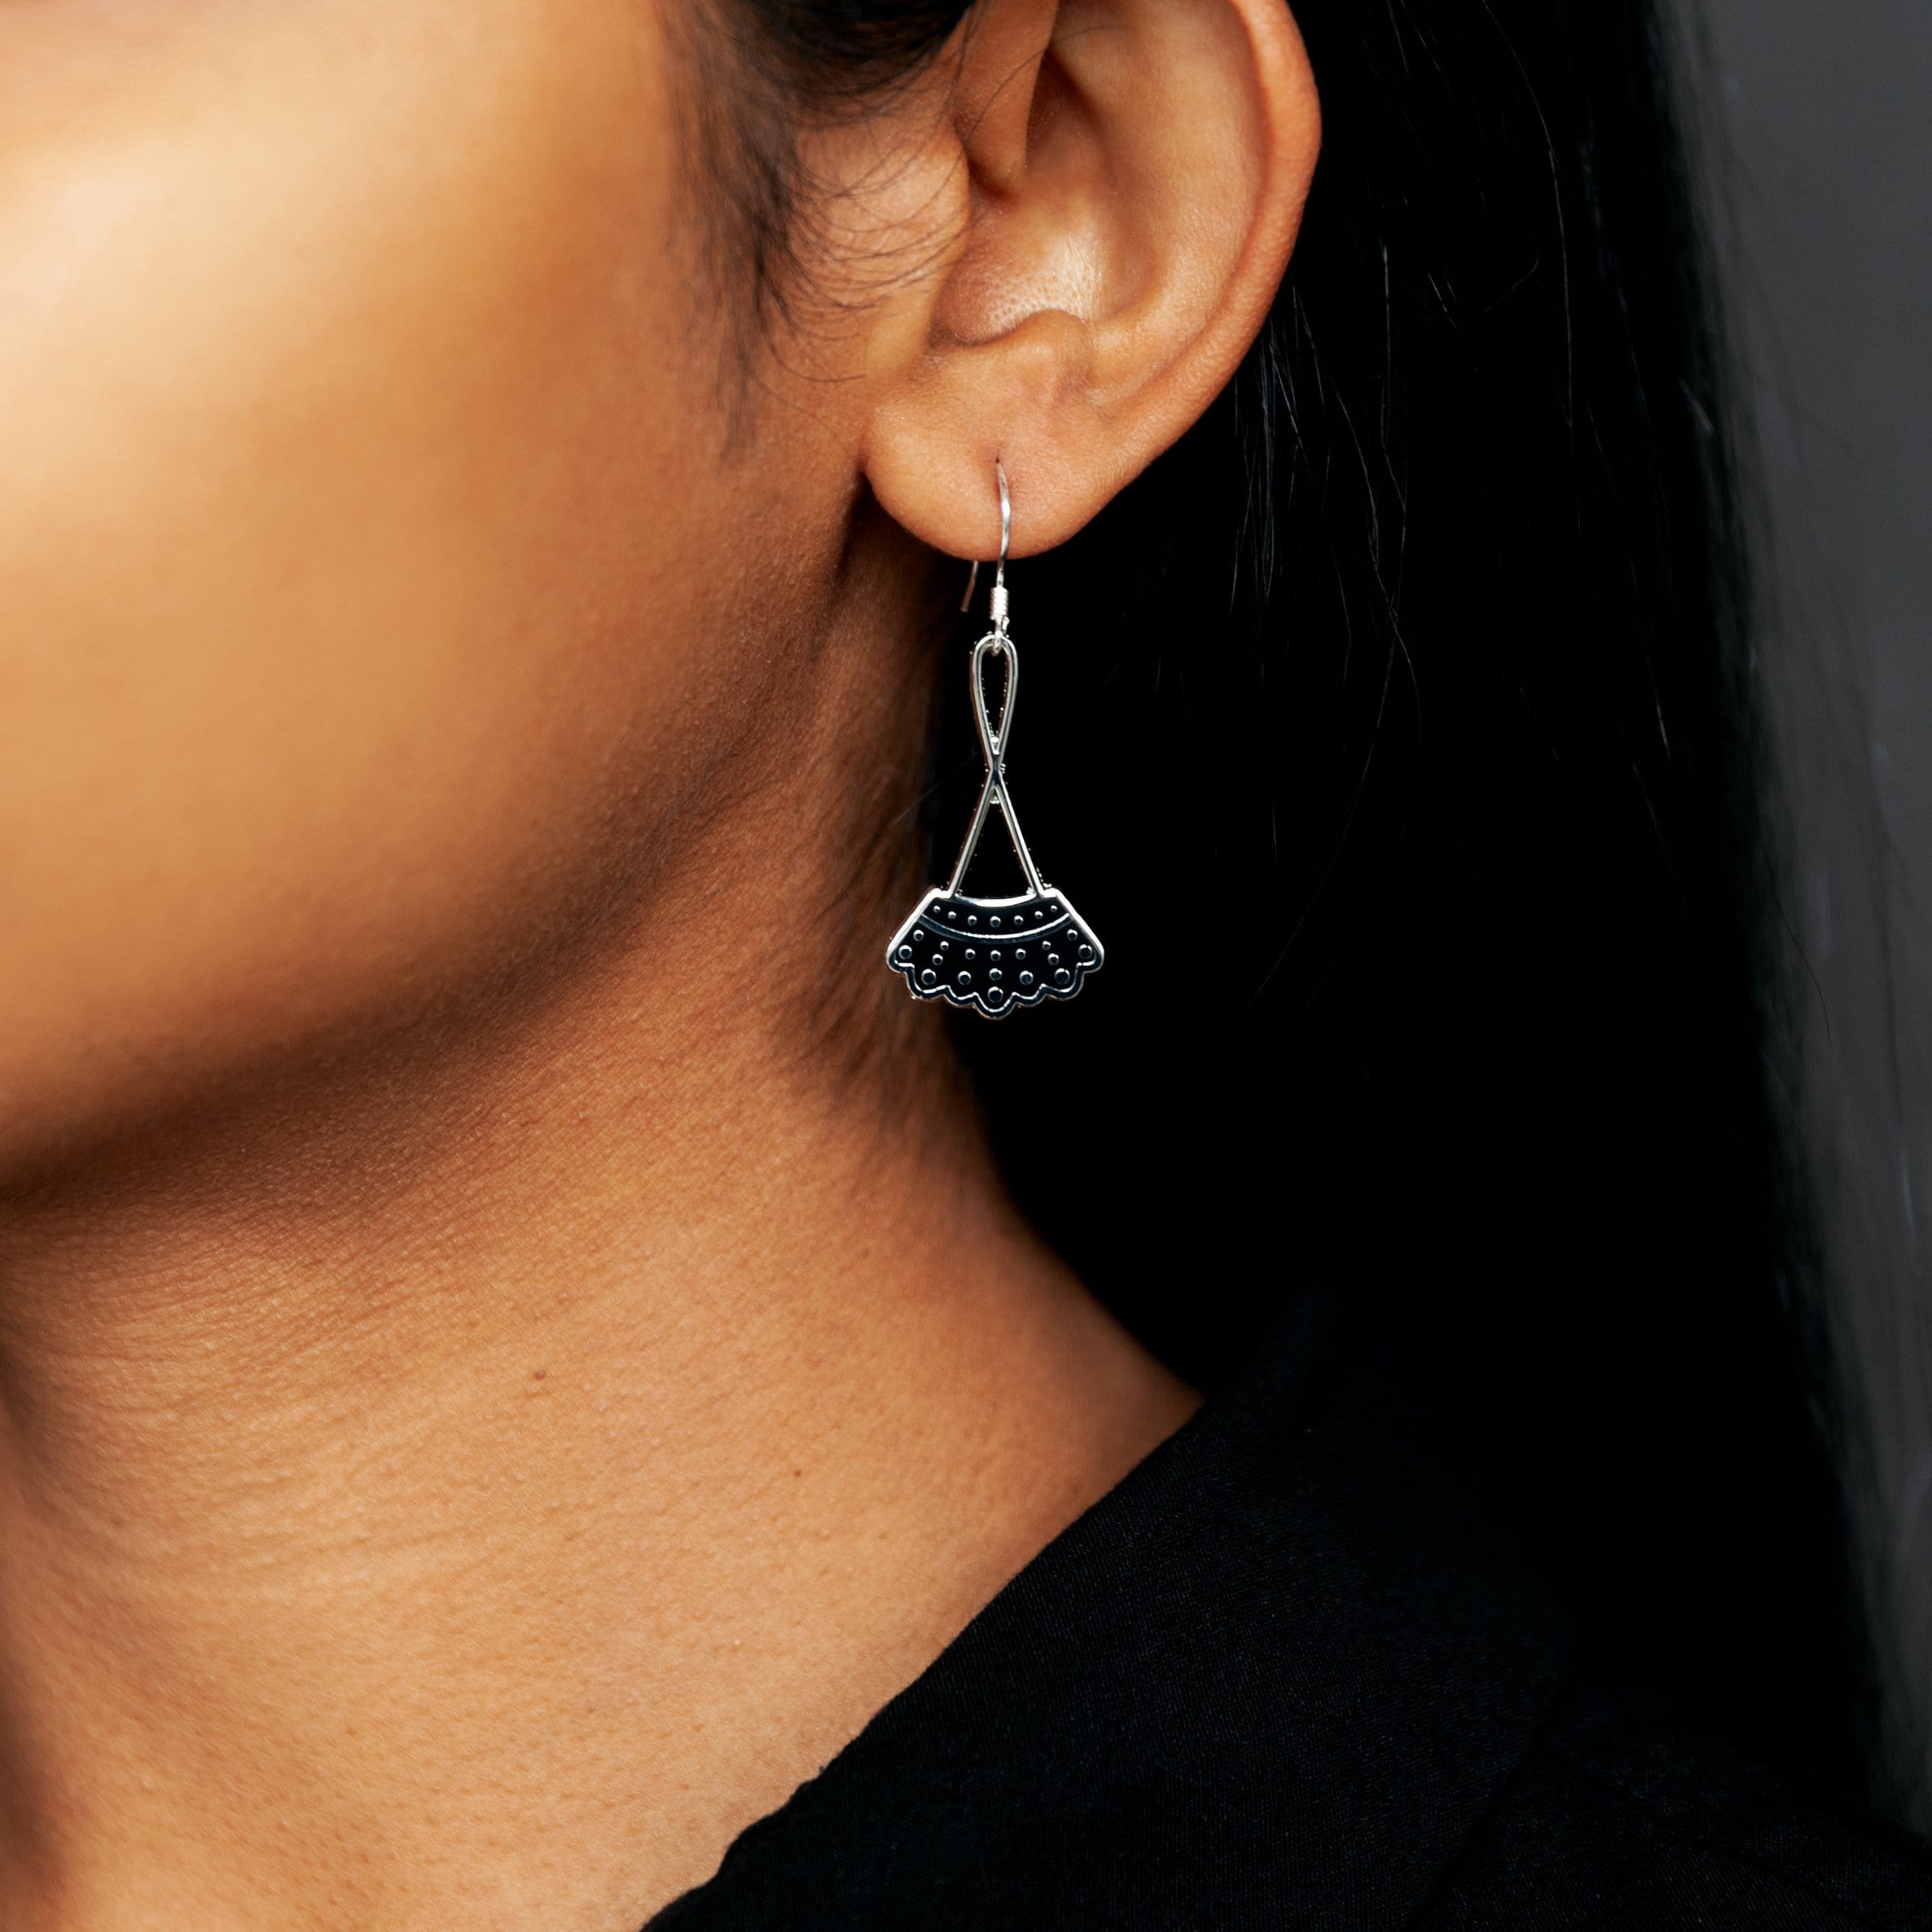 Dissent Collar Earrings Set - Get all four styles!